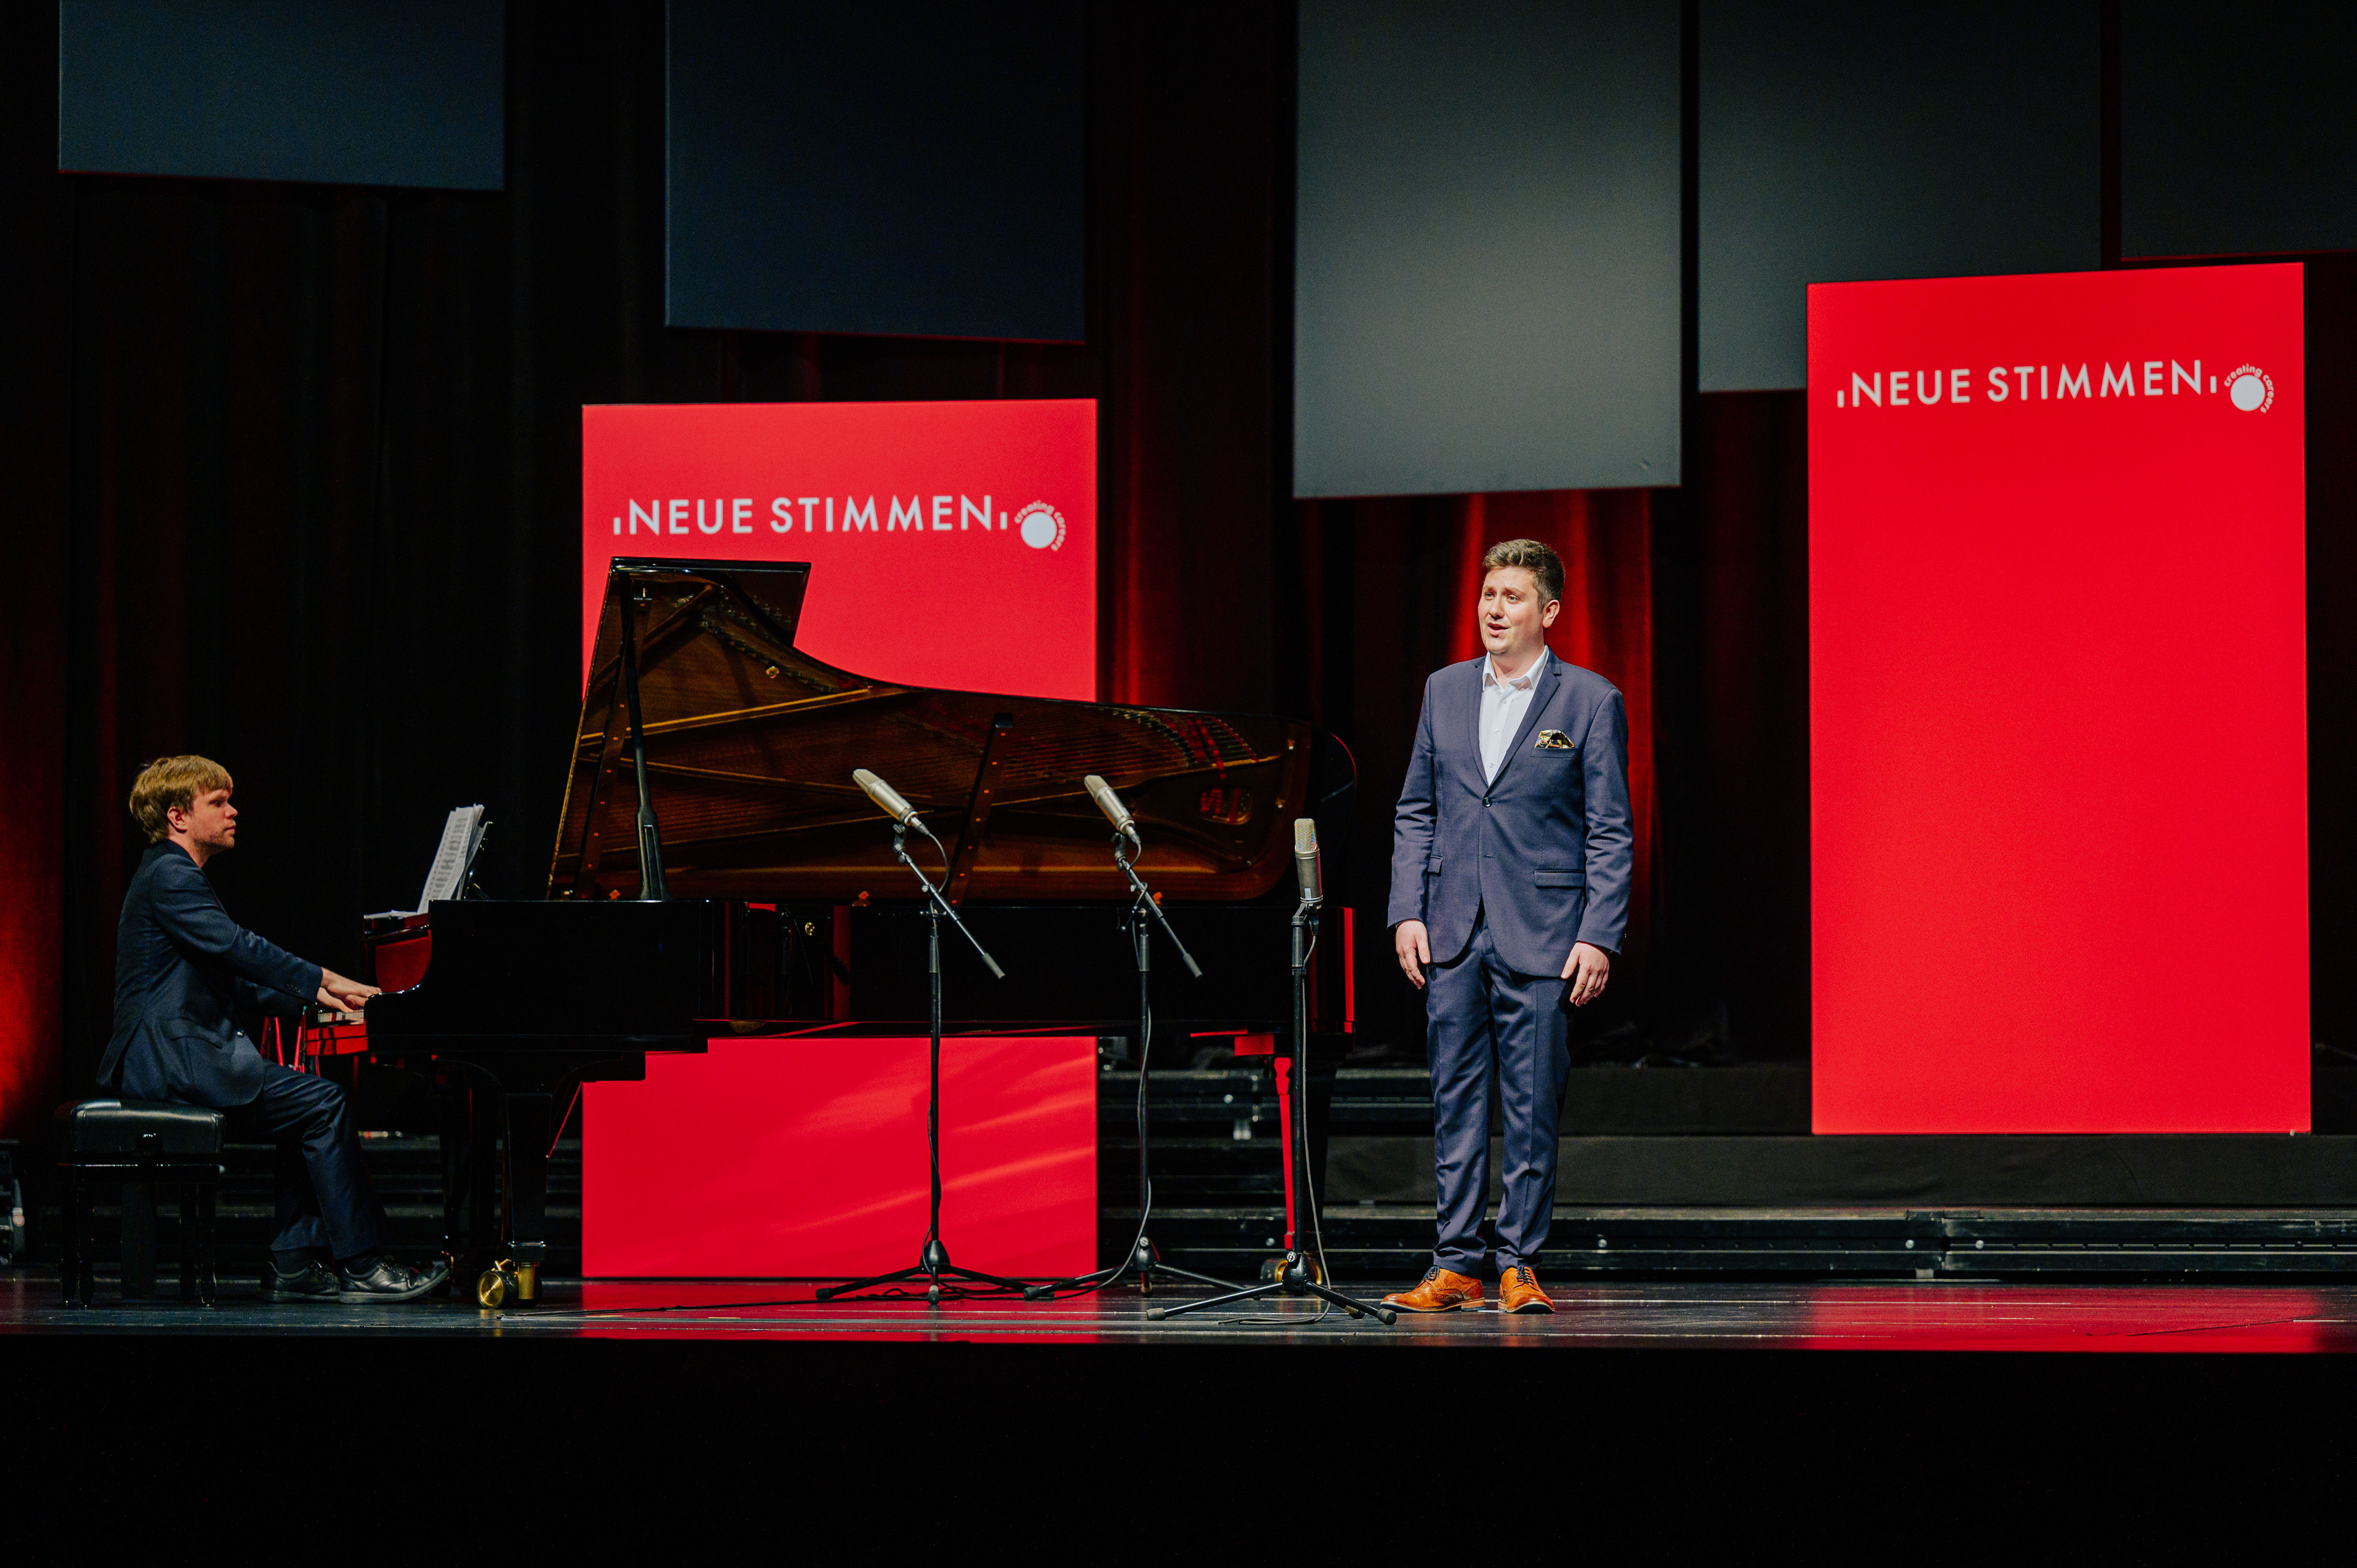 Over 1,000 opera talents from 73 countries apply for NEUE STIMMEN 2024